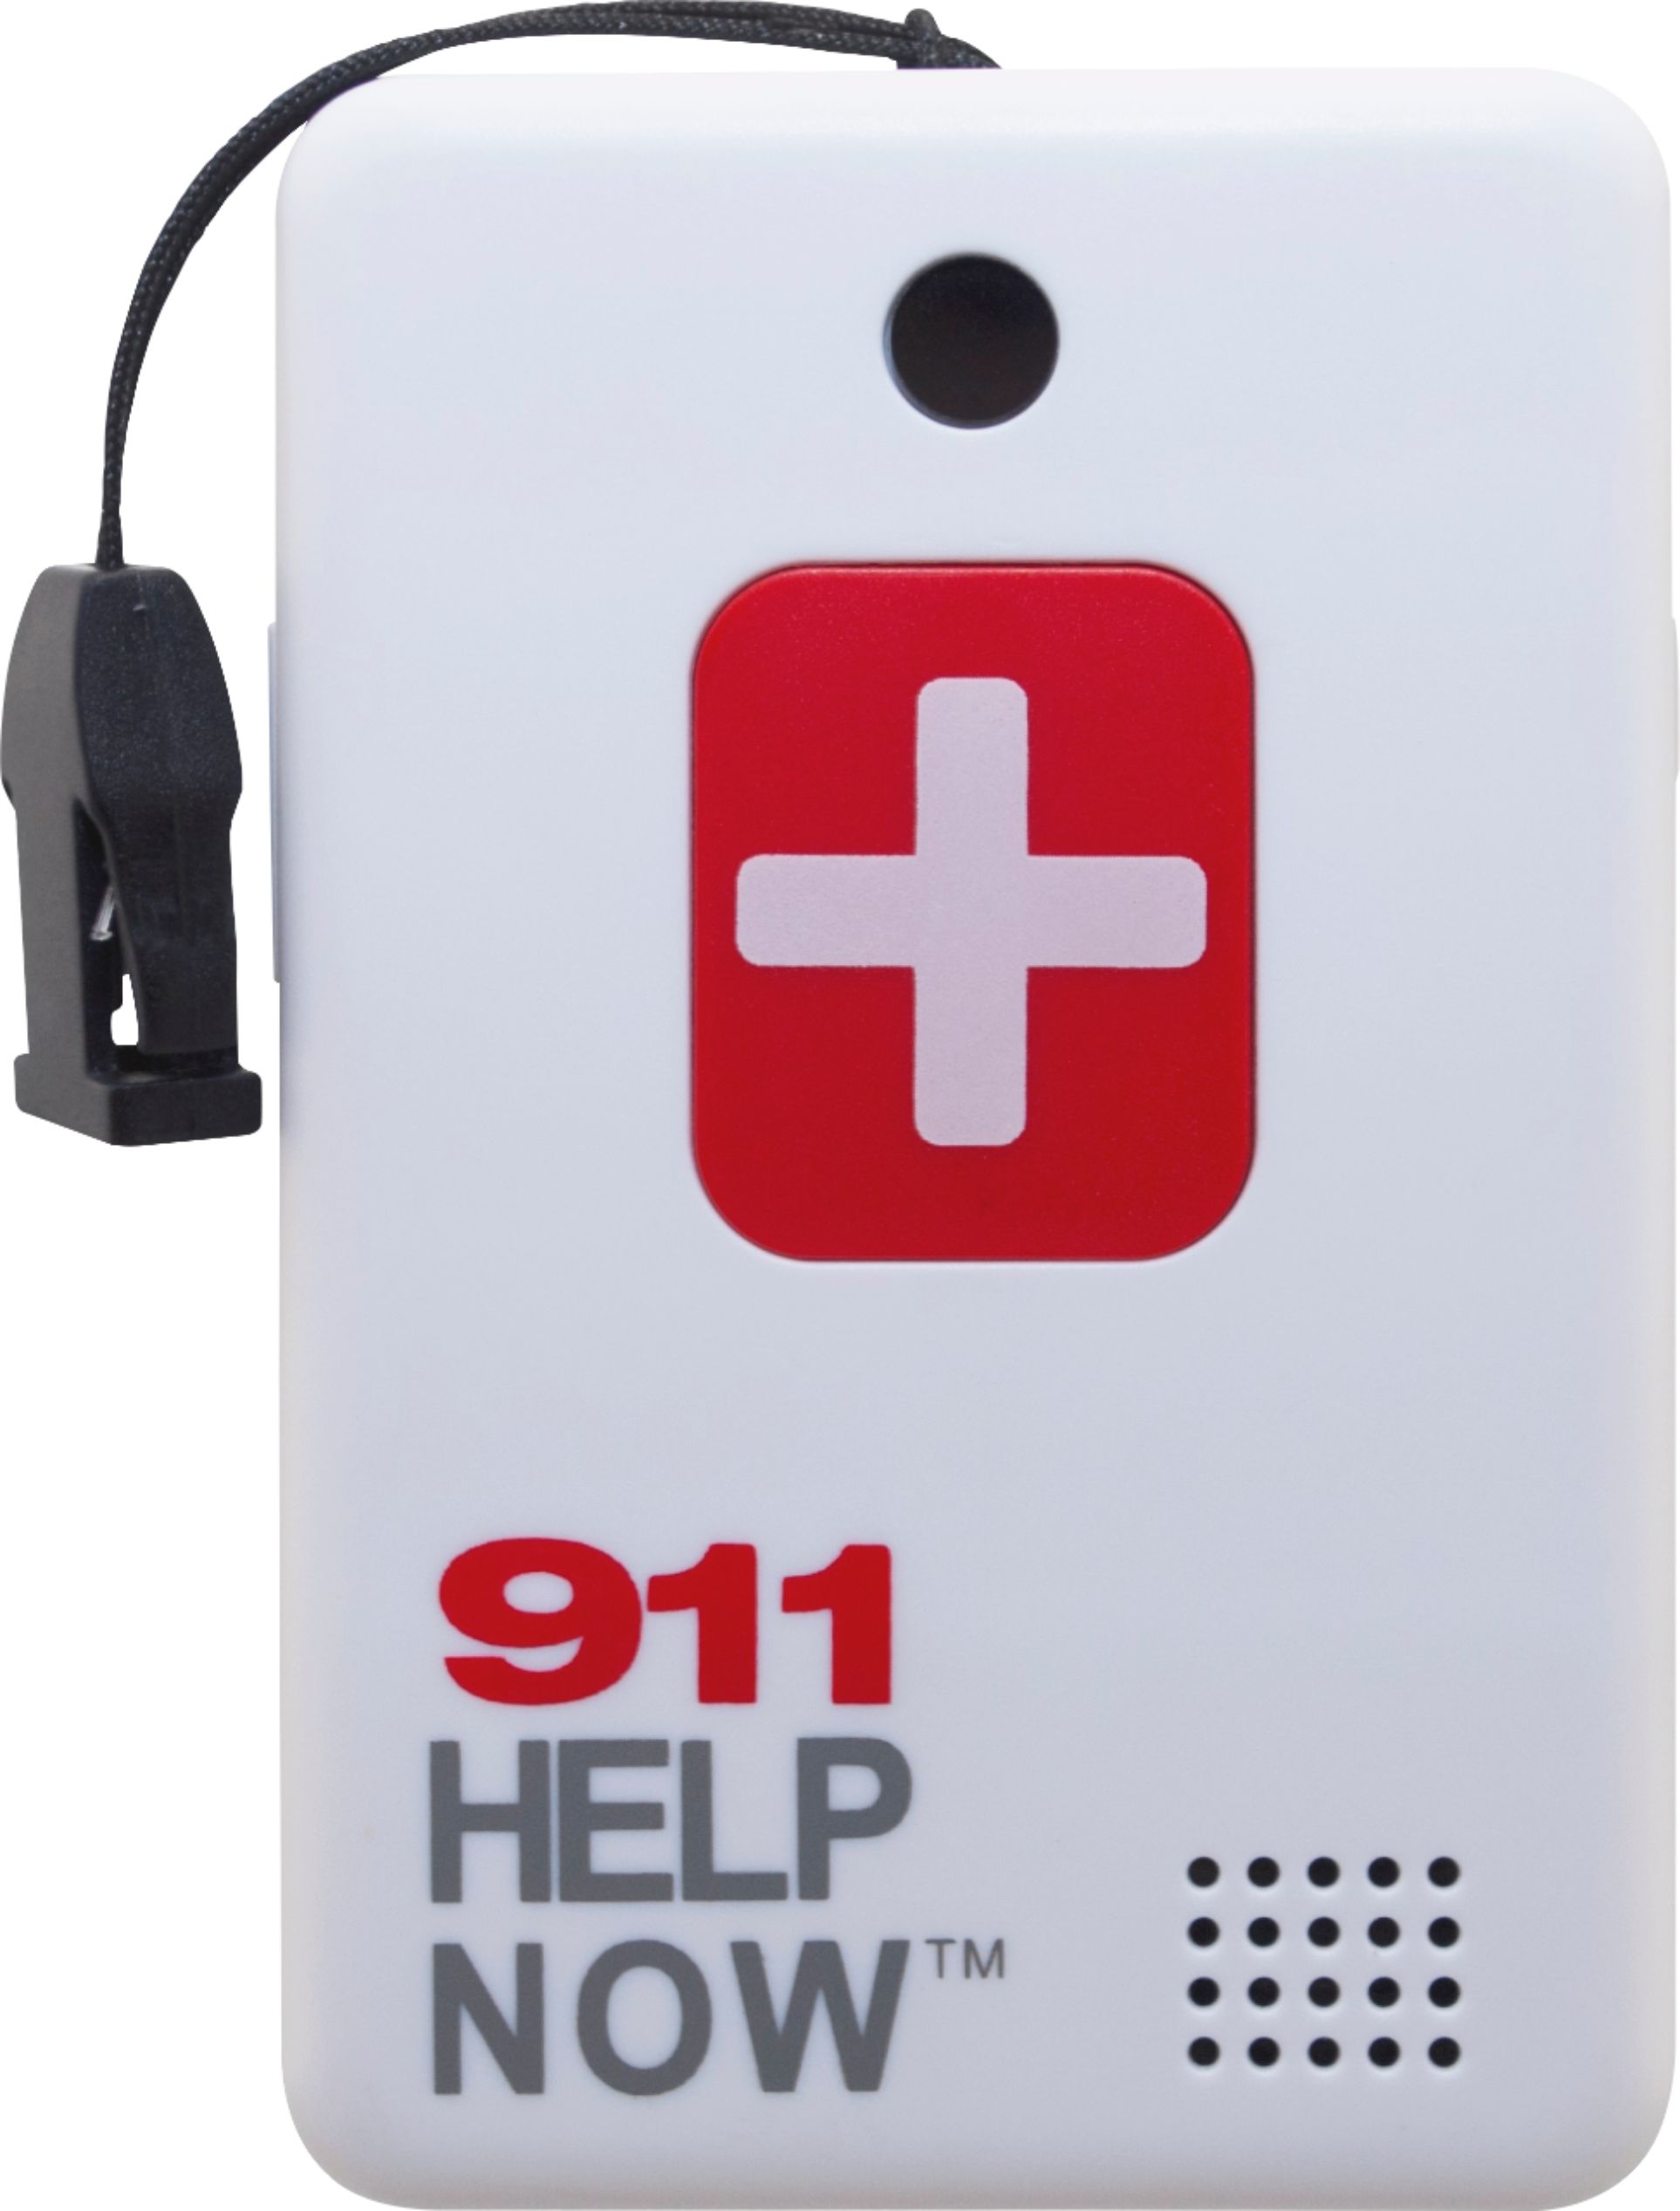 Questions and Answers: Emergency Medical Alert Pendant white 911HN ...